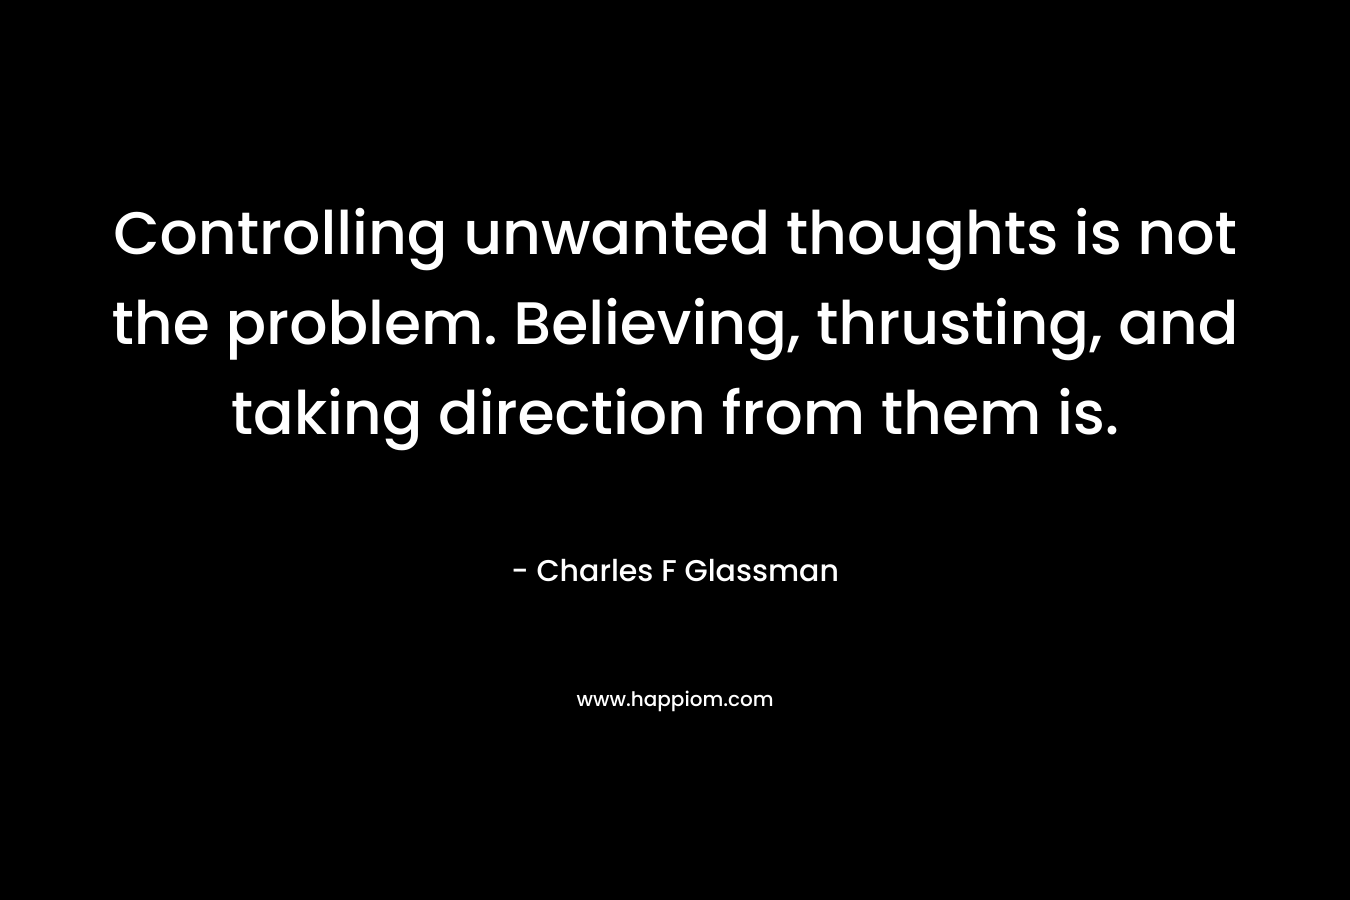 Controlling unwanted thoughts is not the problem. Believing, thrusting, and taking direction from them is.